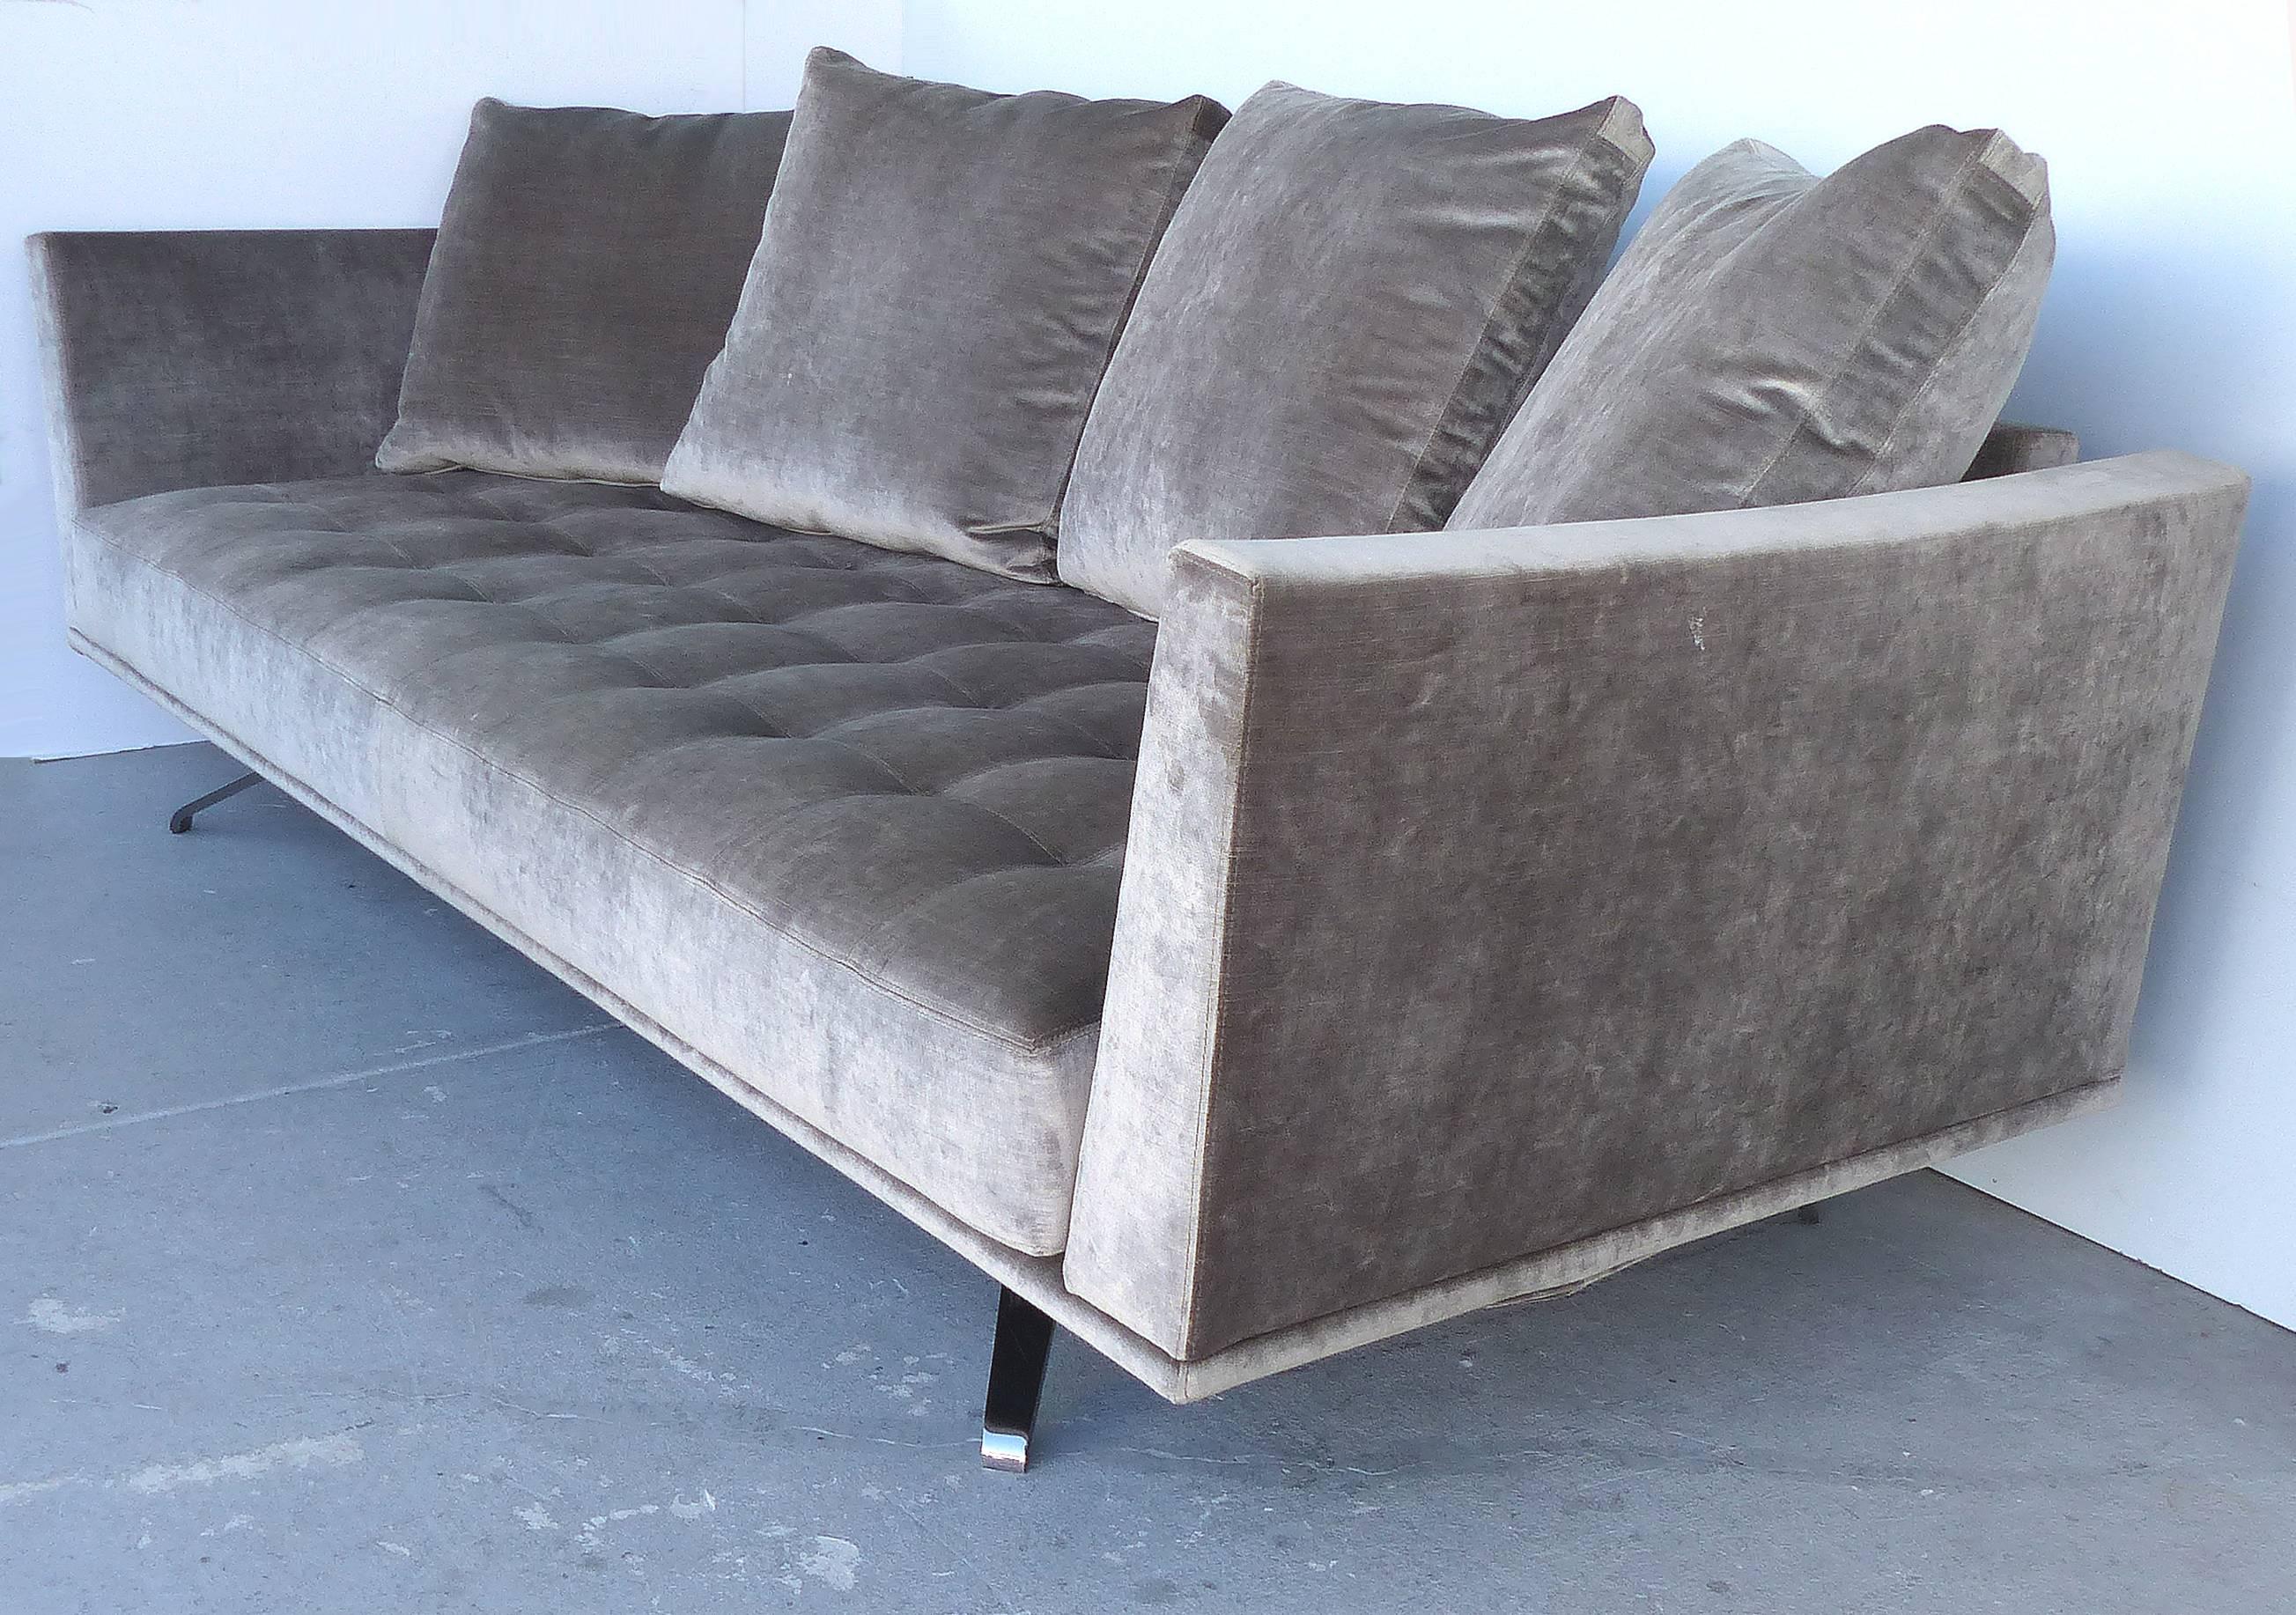 Giancarlo Vegni & Gianfranco Gualtierotti CasaDesús Sofa, Barcelona, Spain

Offered for sale is a Marlow sofa by Giancarlo Vegni & Gianfranco Gualtierotti for CasaDesús. Casadesus is made in Barcelona and was established in 1970 by Jaime CasaDesús.